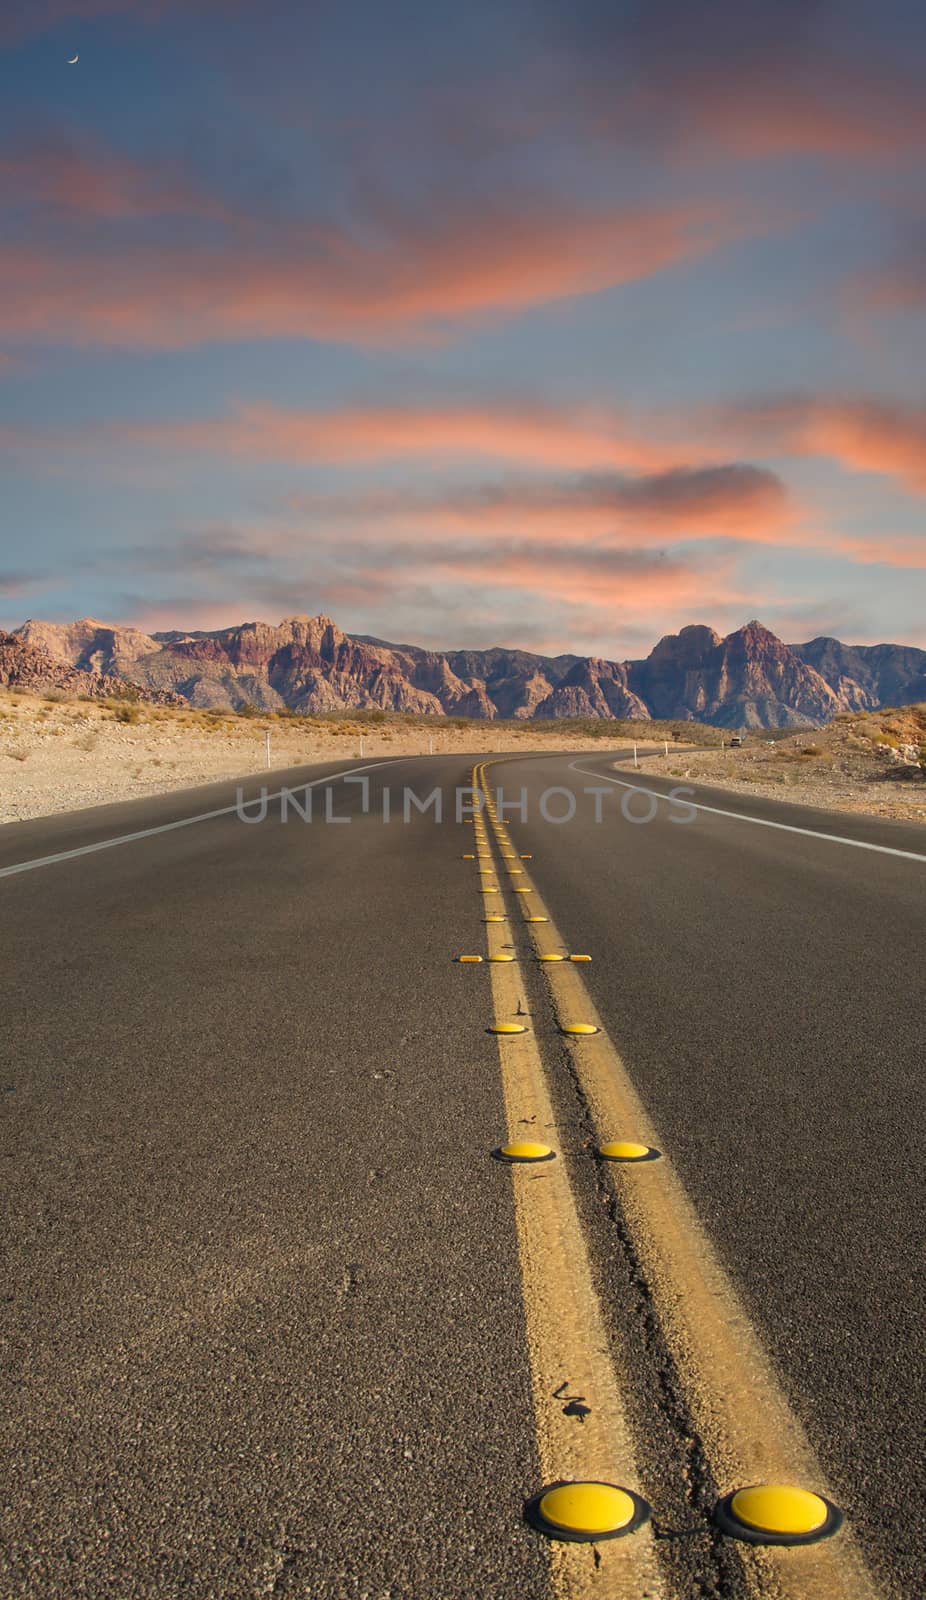 Road Into the Desert at Dusk by dbvirago